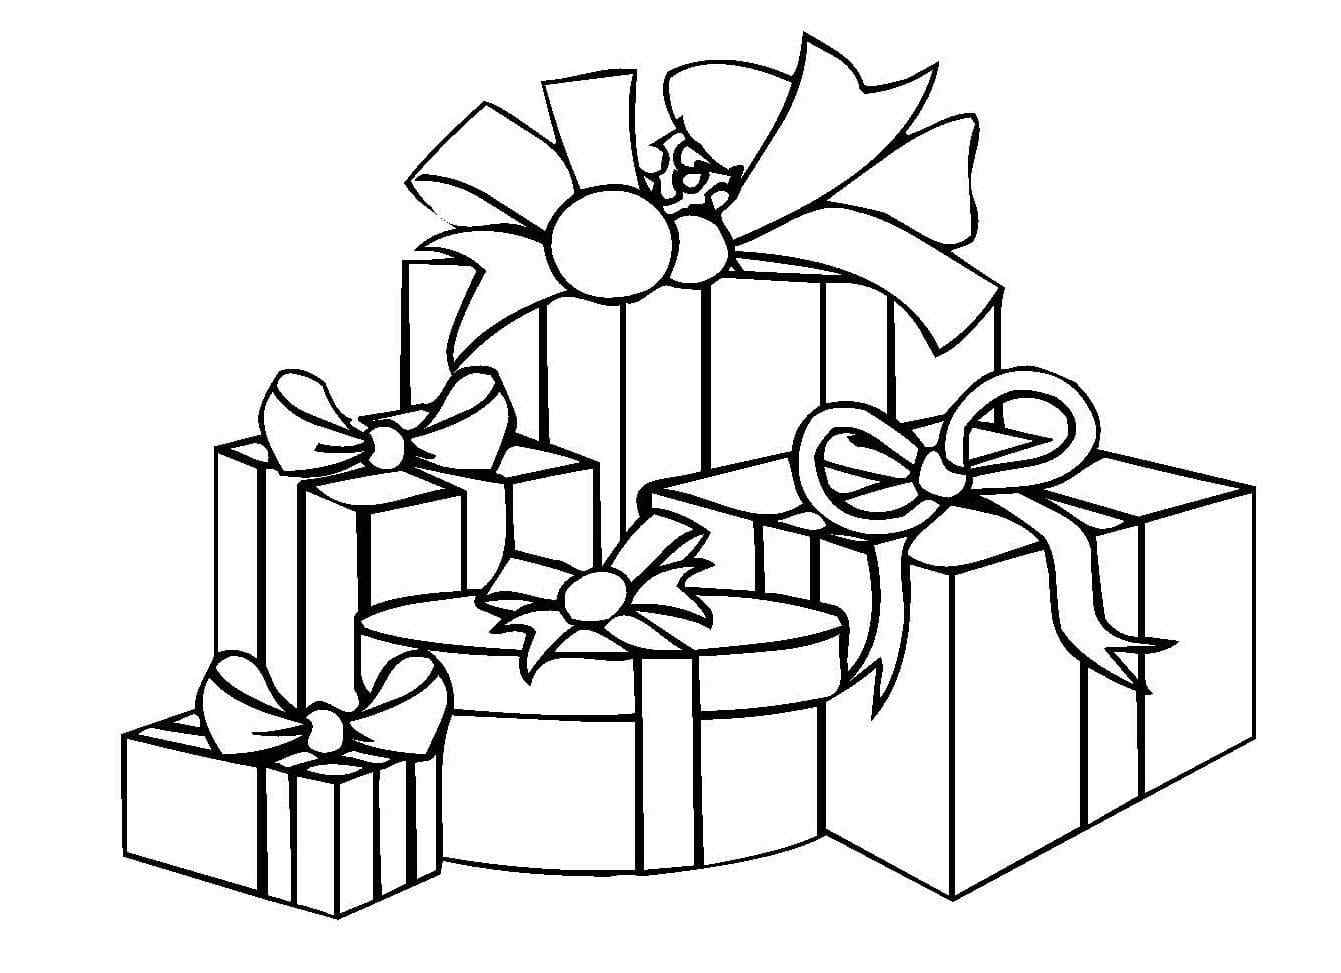 Someone Has Prepared Gifts Coloring Page